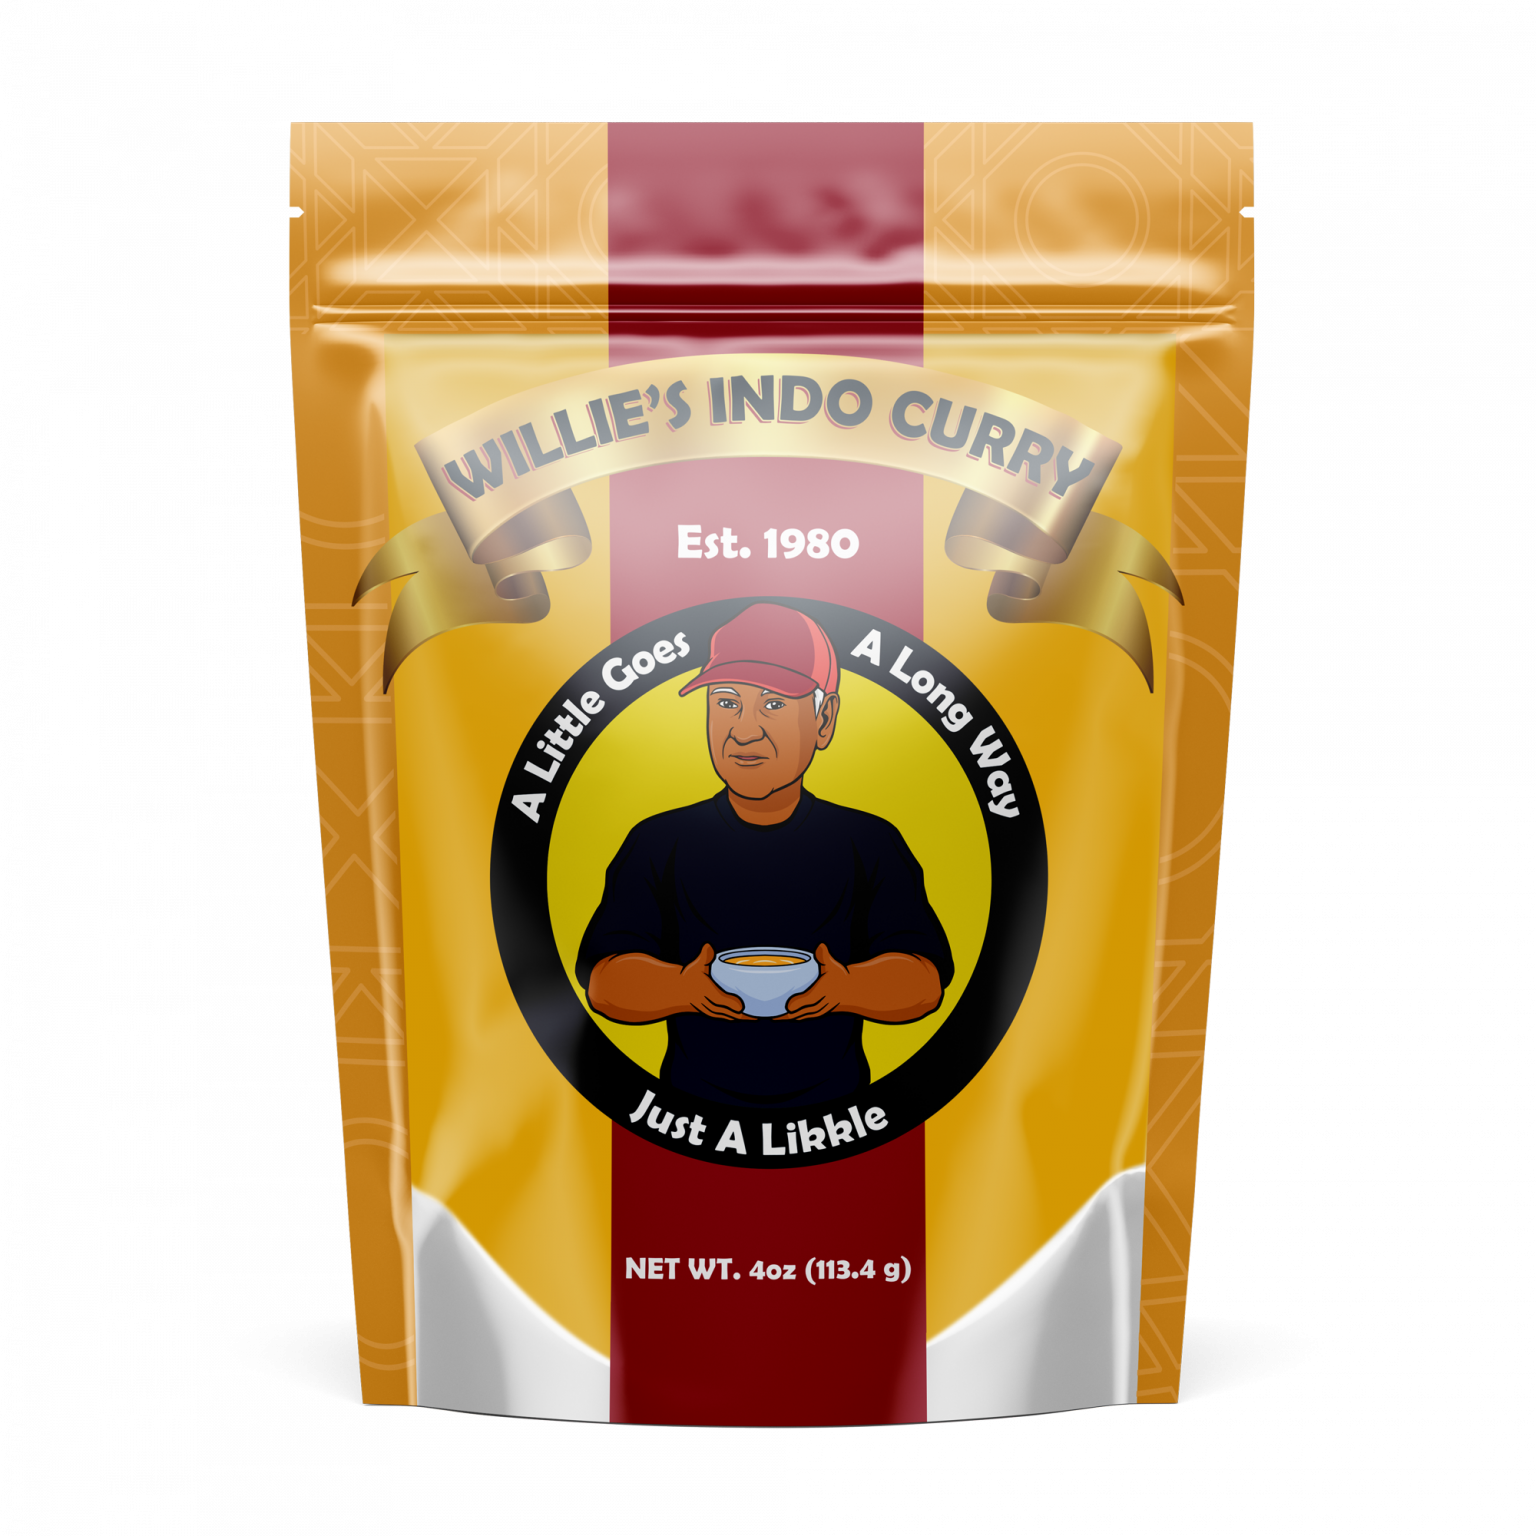 Willies-Indo-Curry-4oz